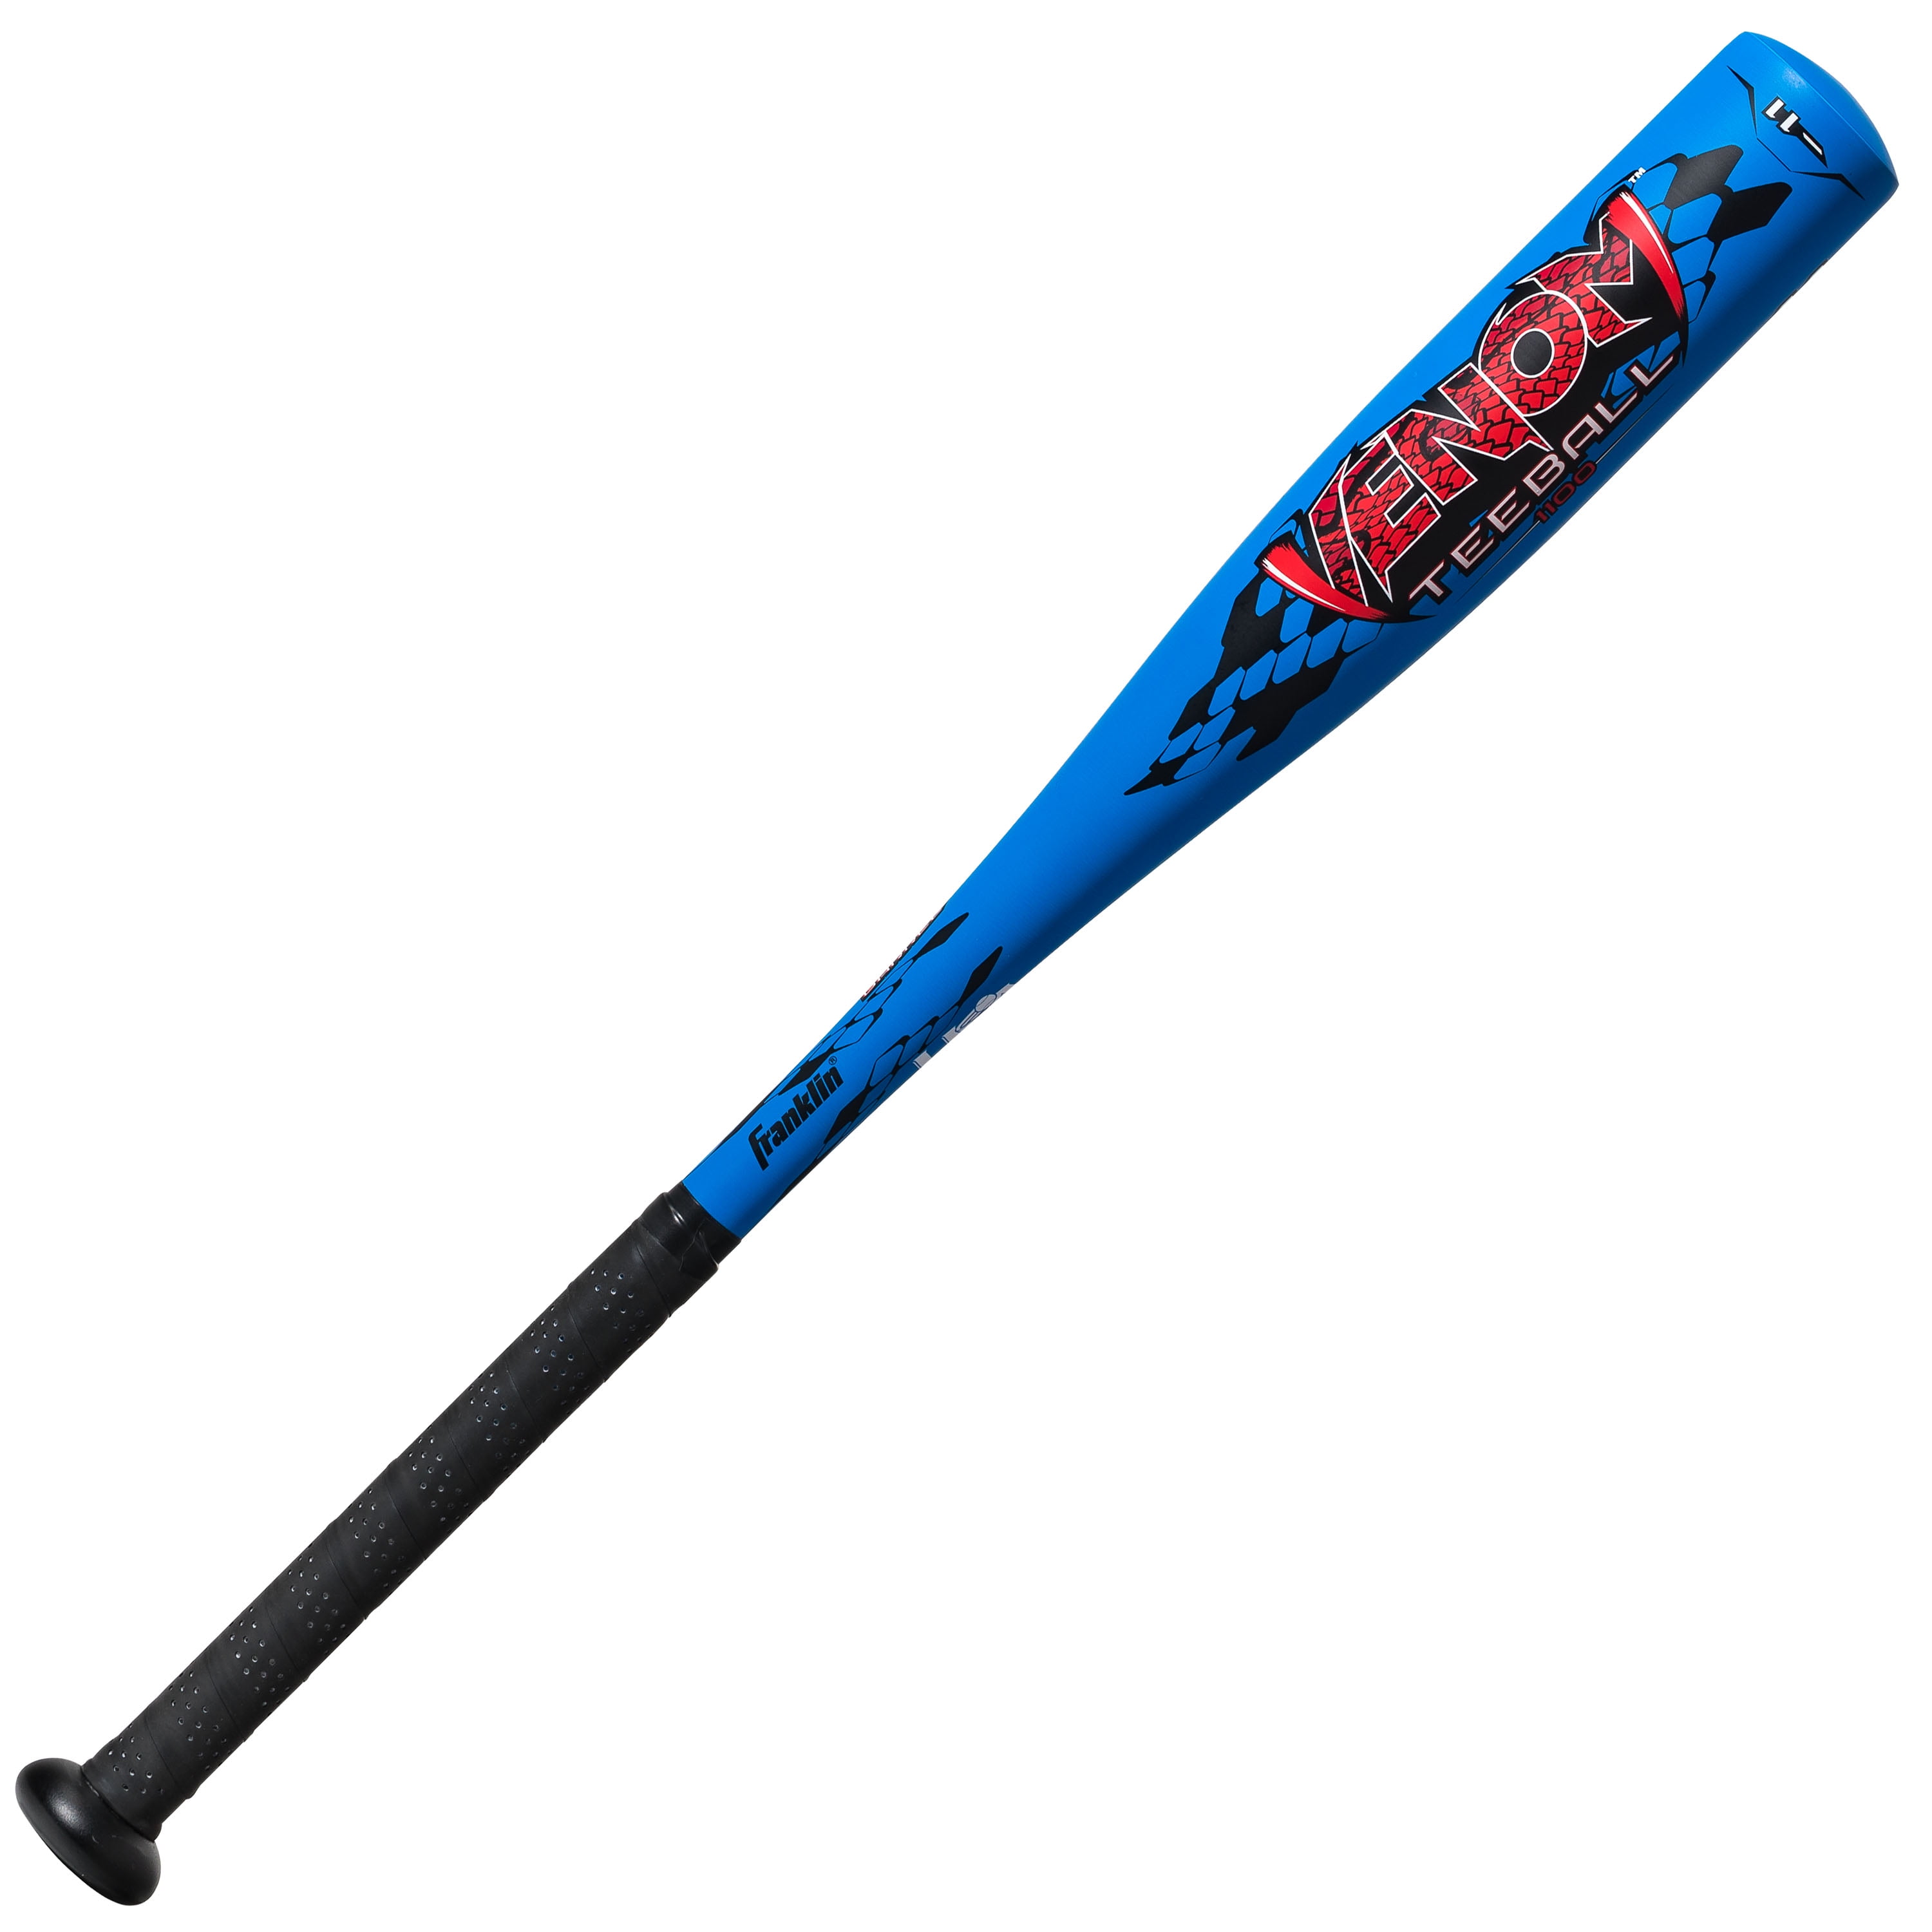 -12 24 in Rawlings Blue Youth T-ball Chauve-souris environ 60.96 cm 